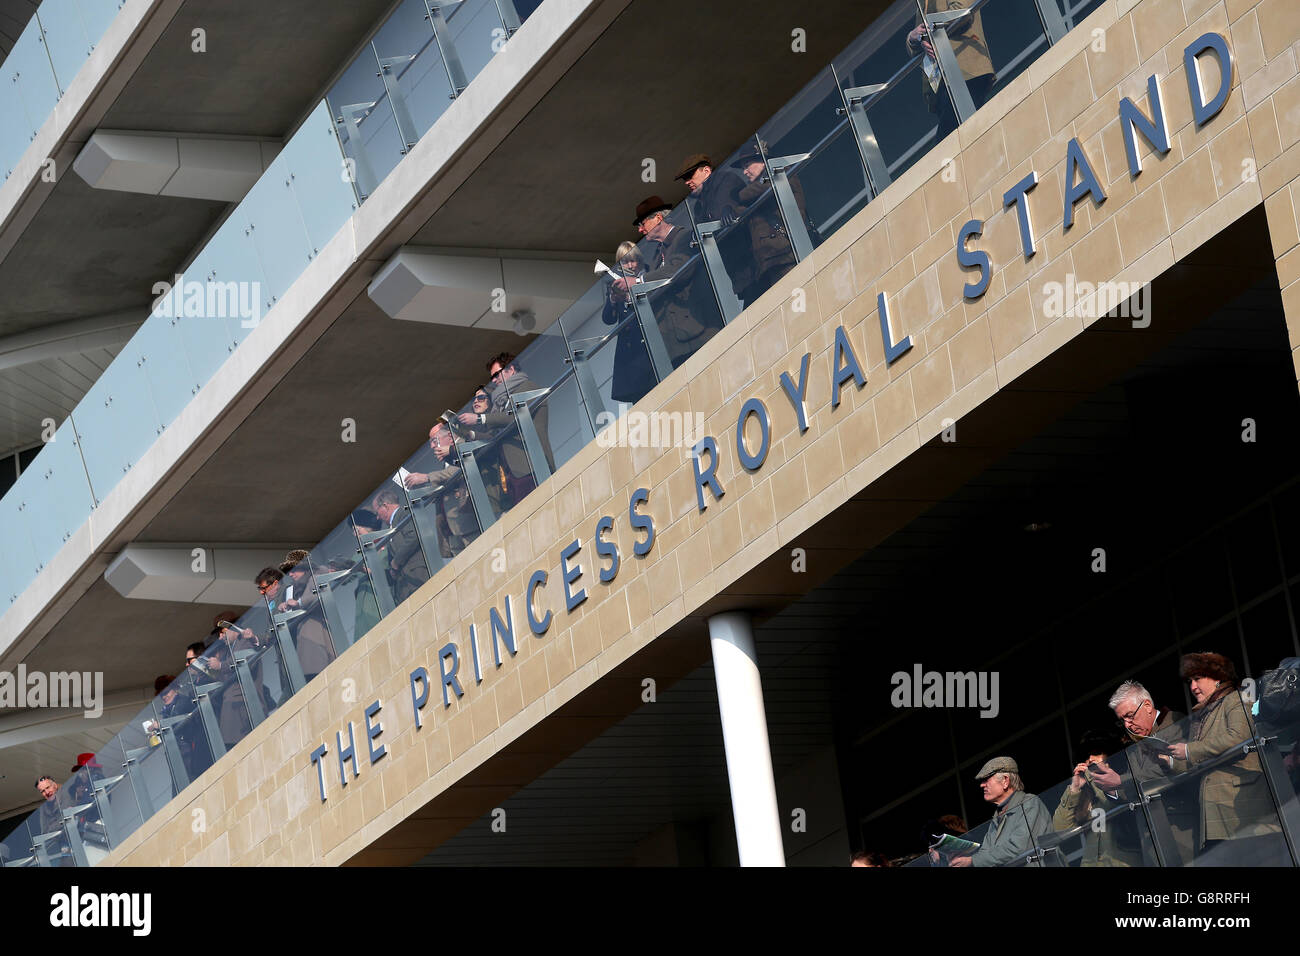 Racegoers look over the balcony of The Princess Royal Stand during St Patrick's Thursday of the 2016 Cheltenham Festival at Cheltenham Racecourse. PRESS ASSOCIATION Photo. Picture date: Thursday March 17, 2016. See PA story RACING Cheltenham. Photo credit should read: David Davies/PA Wire. Stock Photo